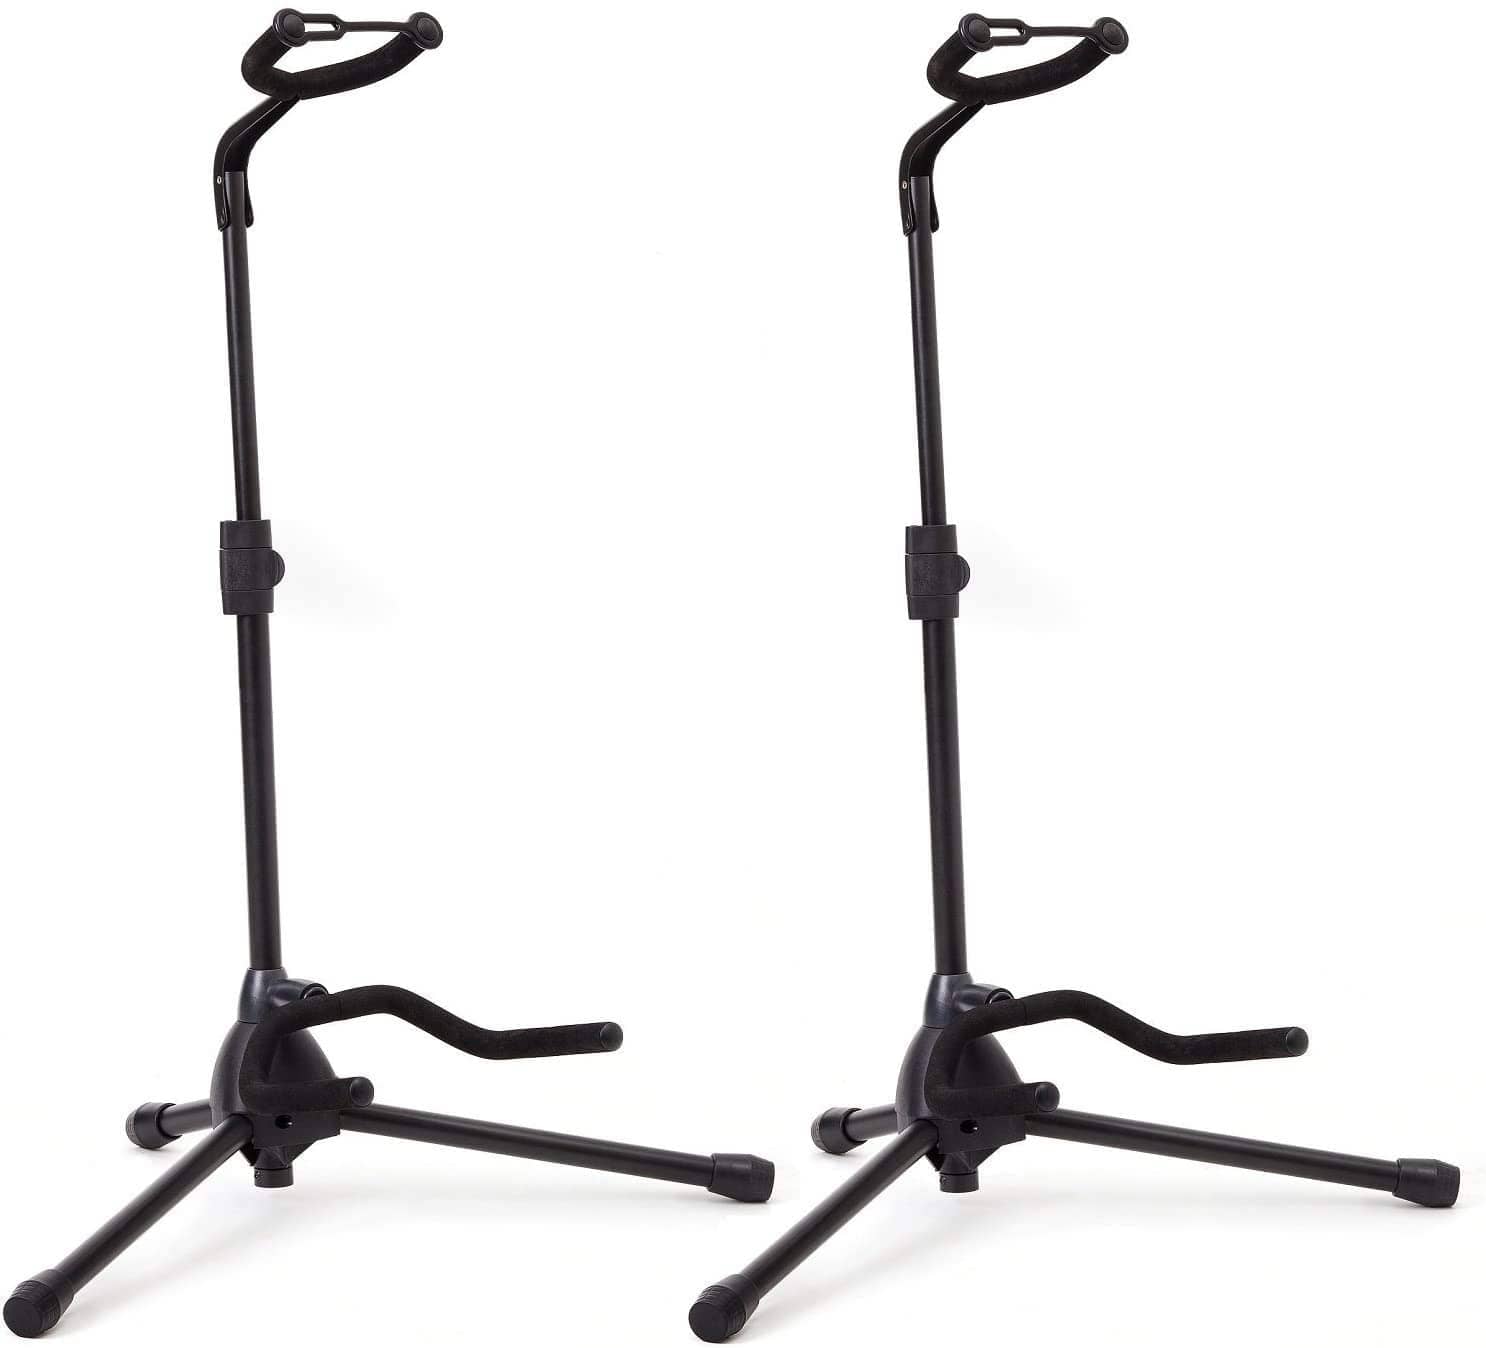 Universal Guitar Stand by Hola! Music – Fits Acoustic, Classical, Electric, Bass Guitars, Mandolins, Banjos, Ukuleles and Other Stringed Instruments – Black 15